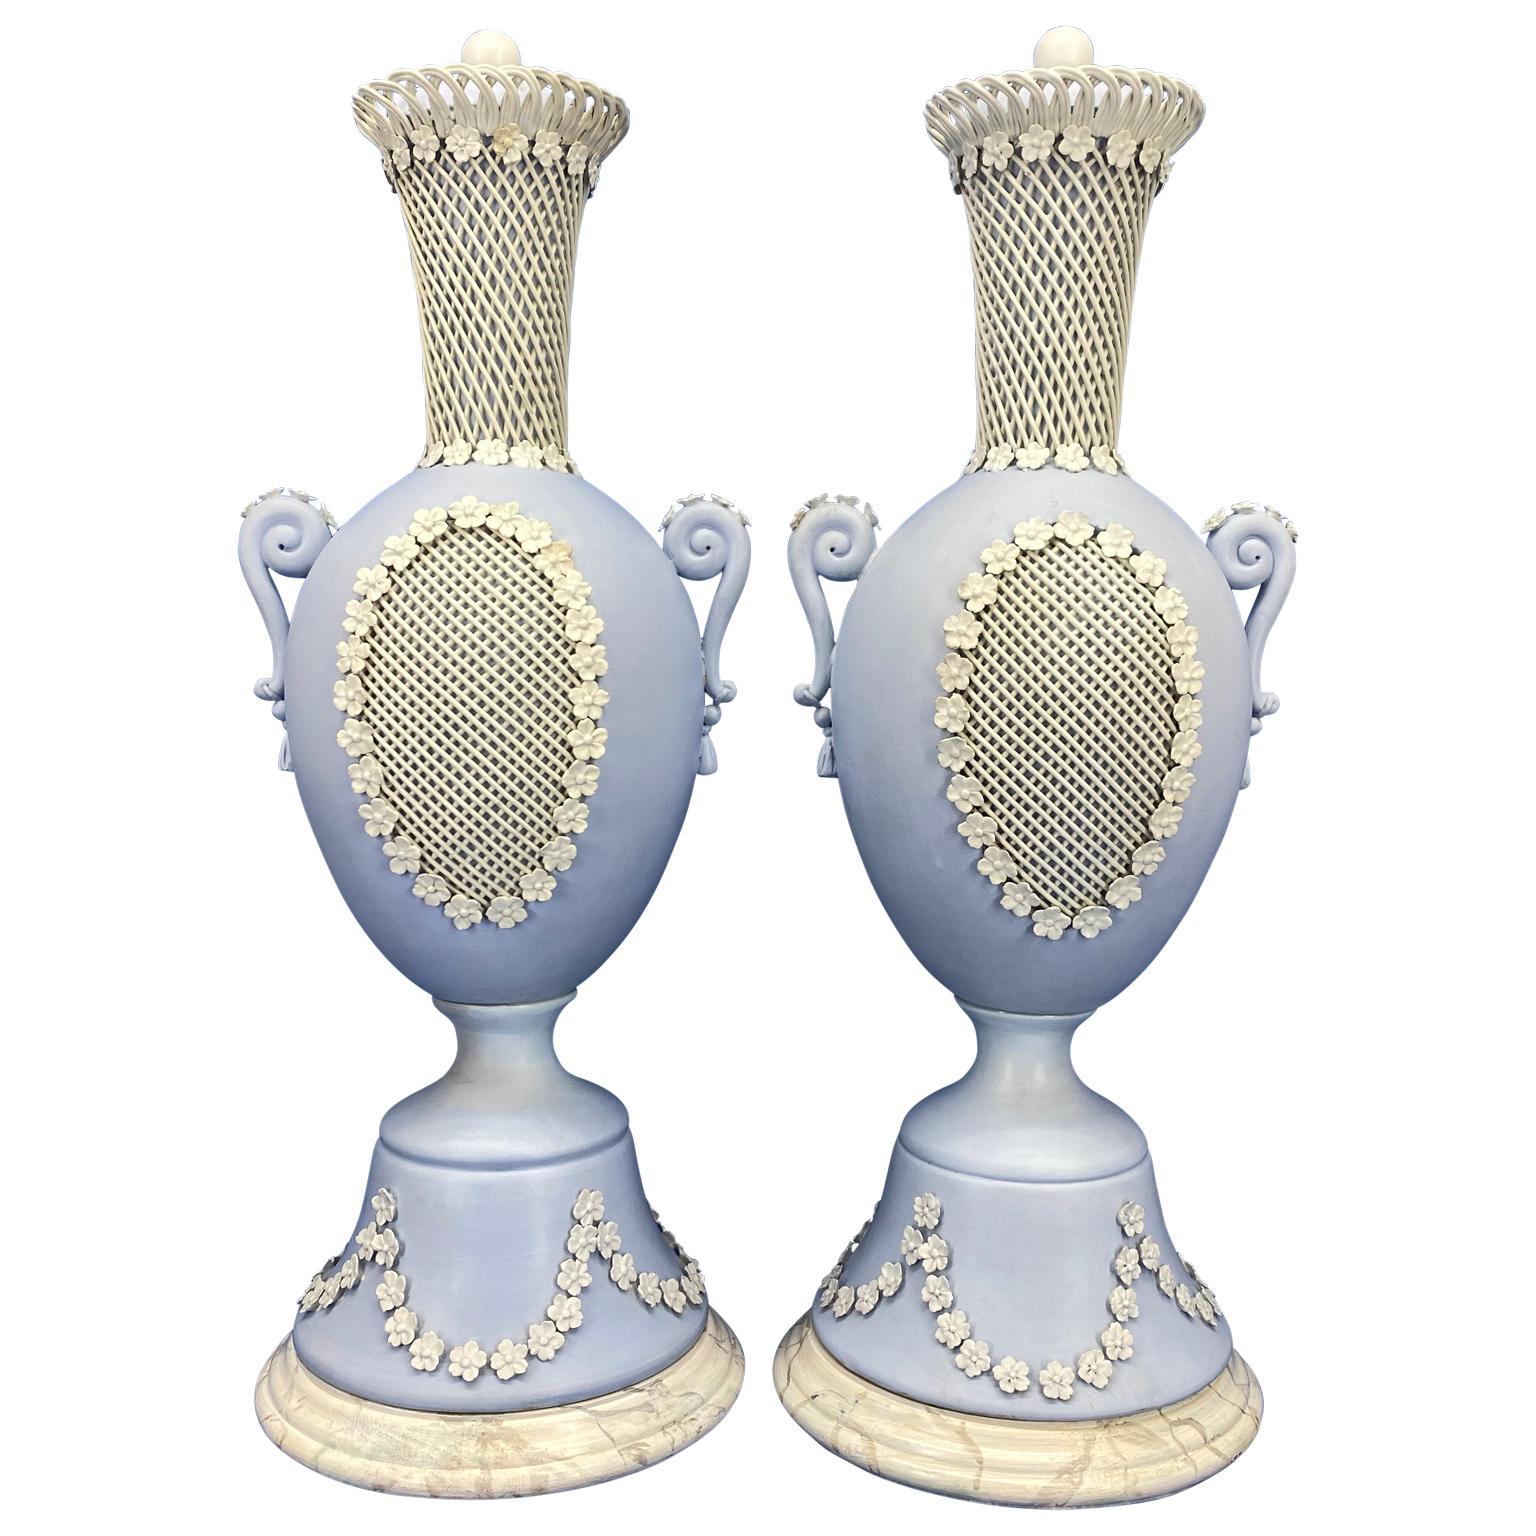 Pair of Wedgwood blue Jasperware urns or ornamental vases with covers.

Each urn with applied white floral design, including small leaves, bell flowers and relief with floral festoons. The urns are secured on two later faux marble wood bases. A